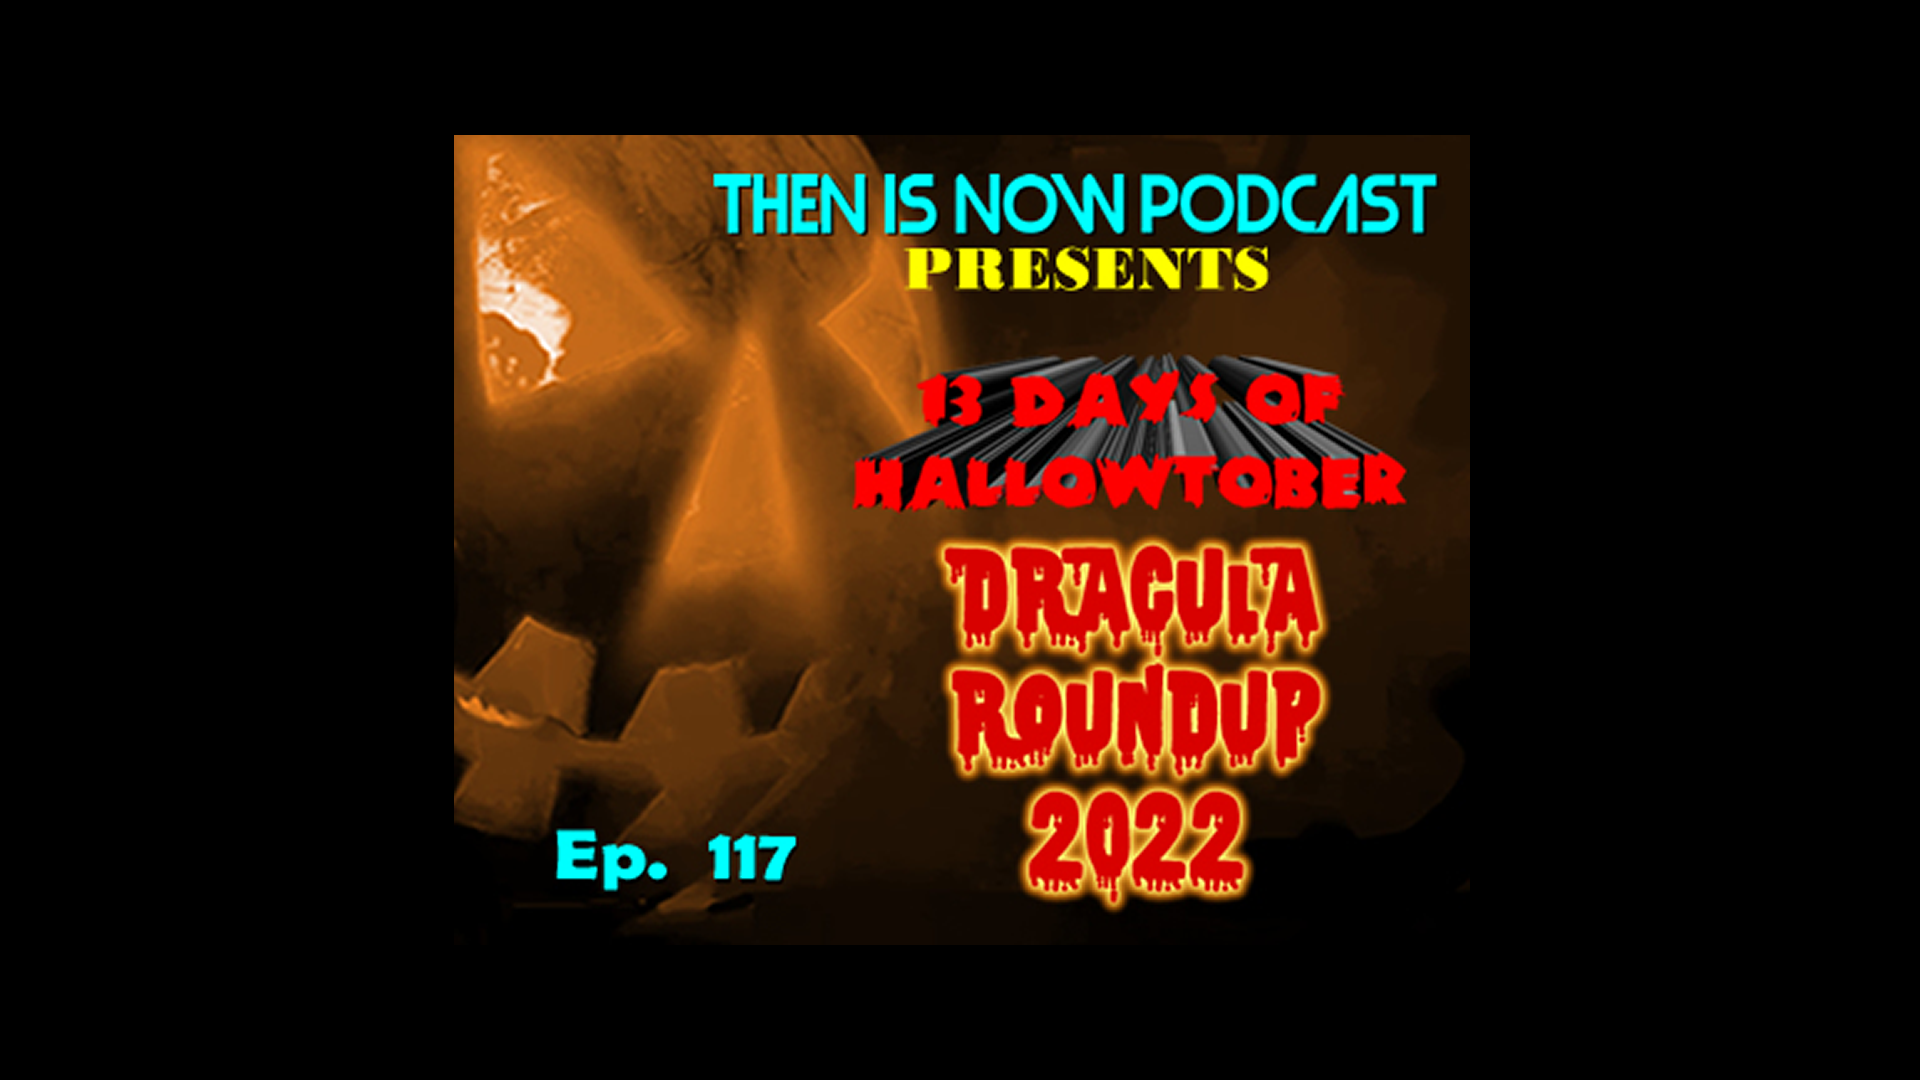 Then Is Now Ep 117 – 13 Days of Hallowtober 2022 – Dracula Roundup